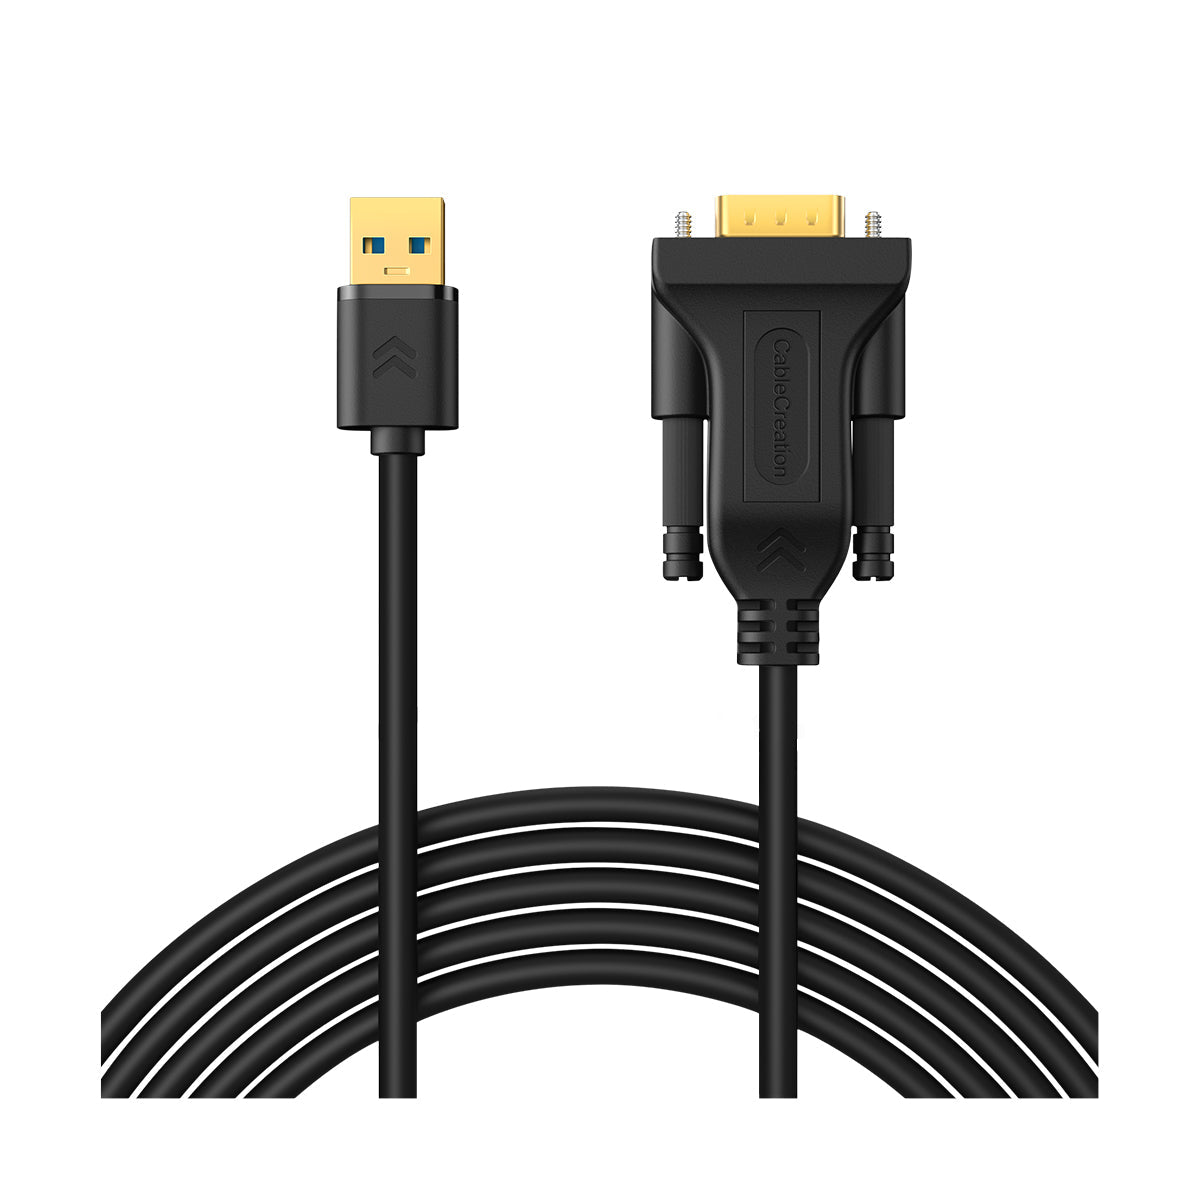 USB 3.0 to VGA Cable 6 Feet, CableCreation USB to VGA Adapter Cord 1080P @  60Hz, External Video Card, Only Support Windows 10/8.1/8 / 7 (NO  XP/Vista/Mac OS X), Black 